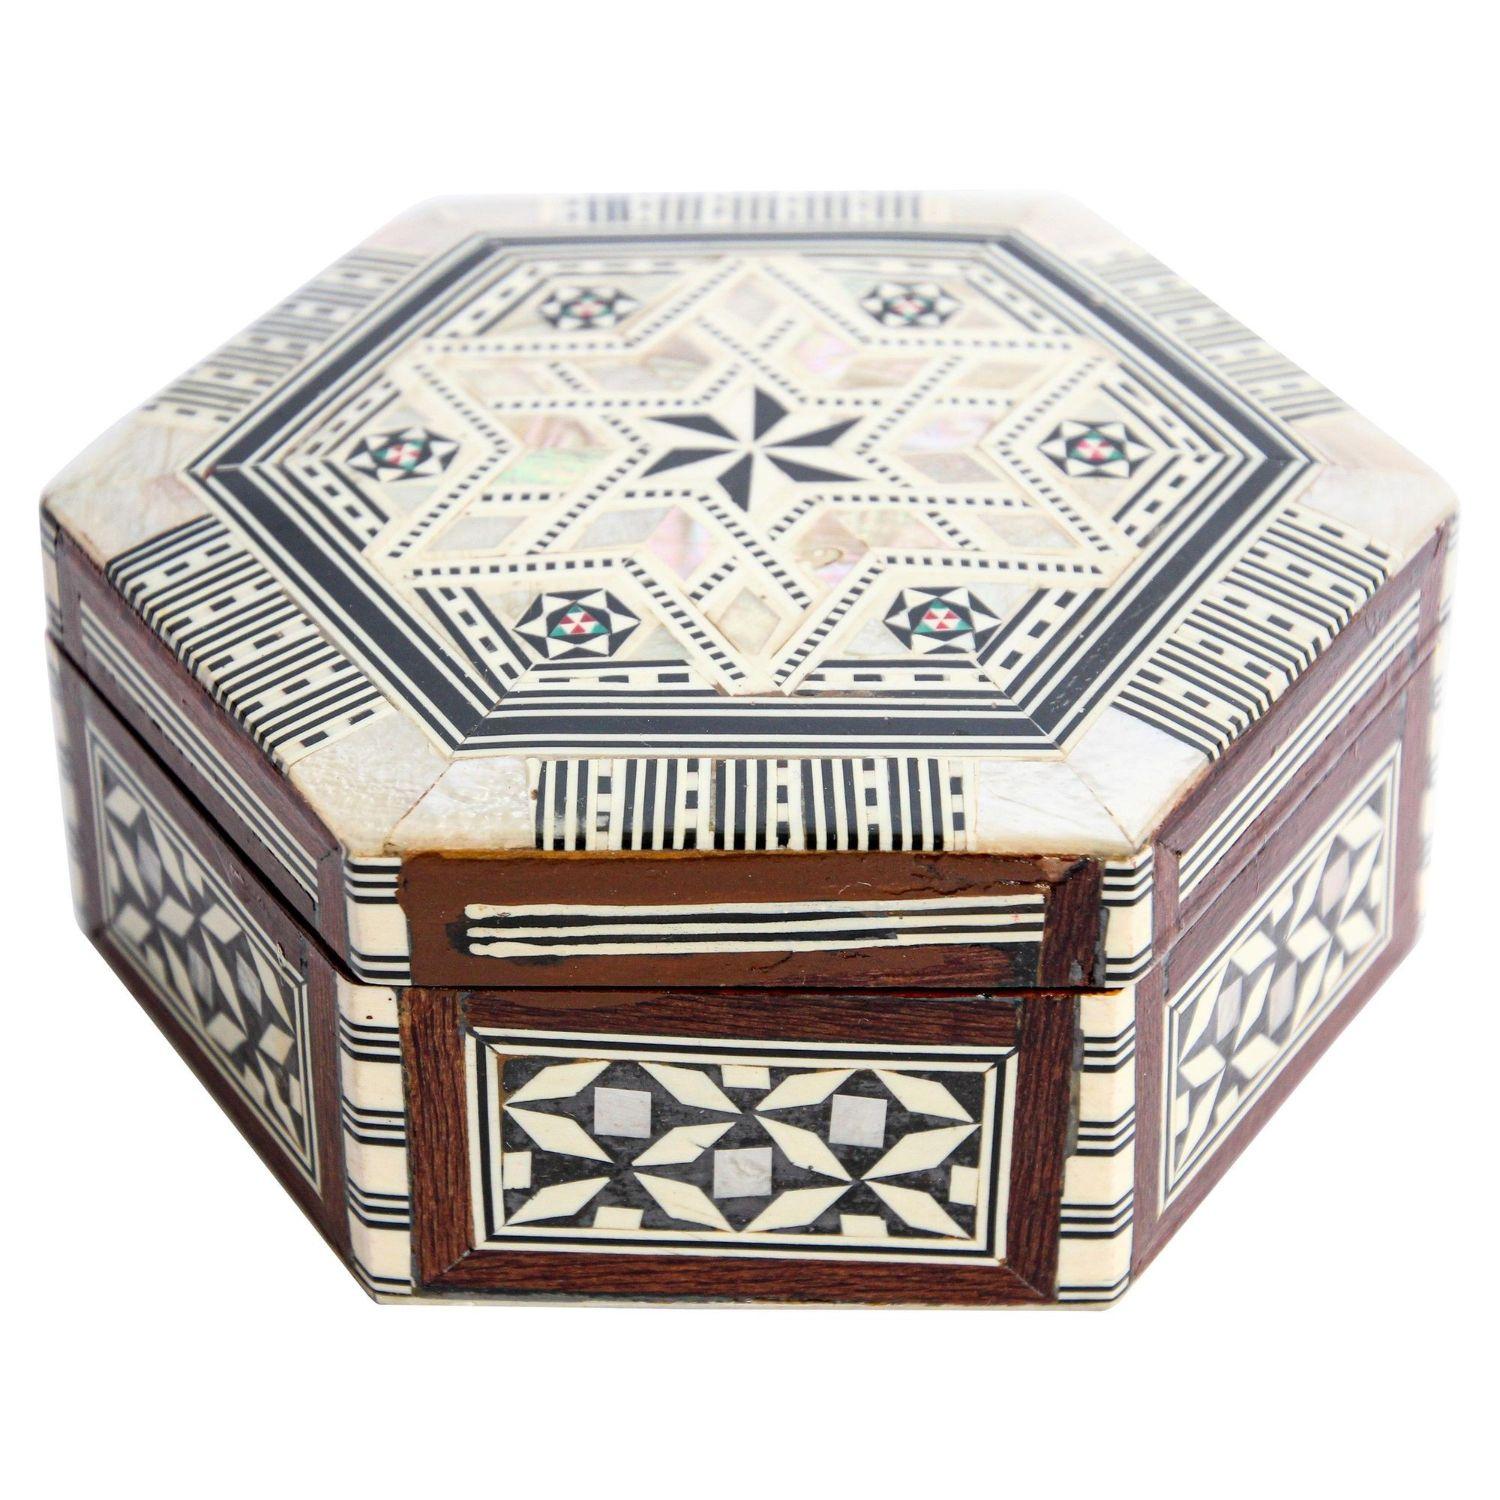 Exquisite handcrafted Middle Eastern Lebanese mosaic inlaid walnut wood box. Small hexagonal walnut box intricately decorated with Moorish motif designs which have been painstakingly inlaid with mosaic marquetry. The interior is lined with red